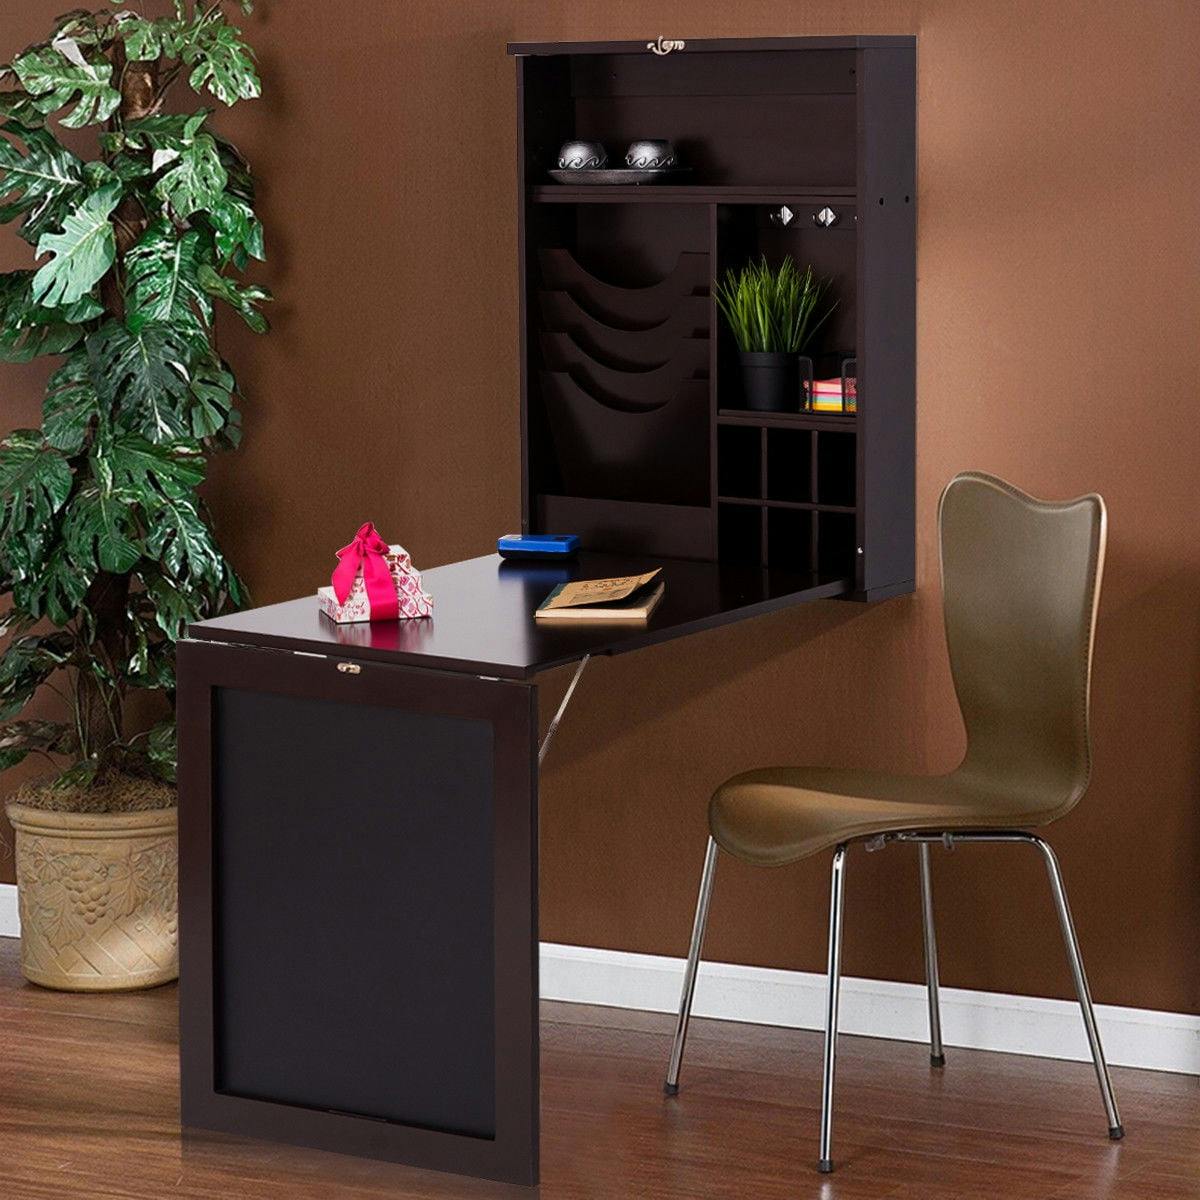 Compact Foldable Coffee Wall-Mounted Desk with Chalkboard